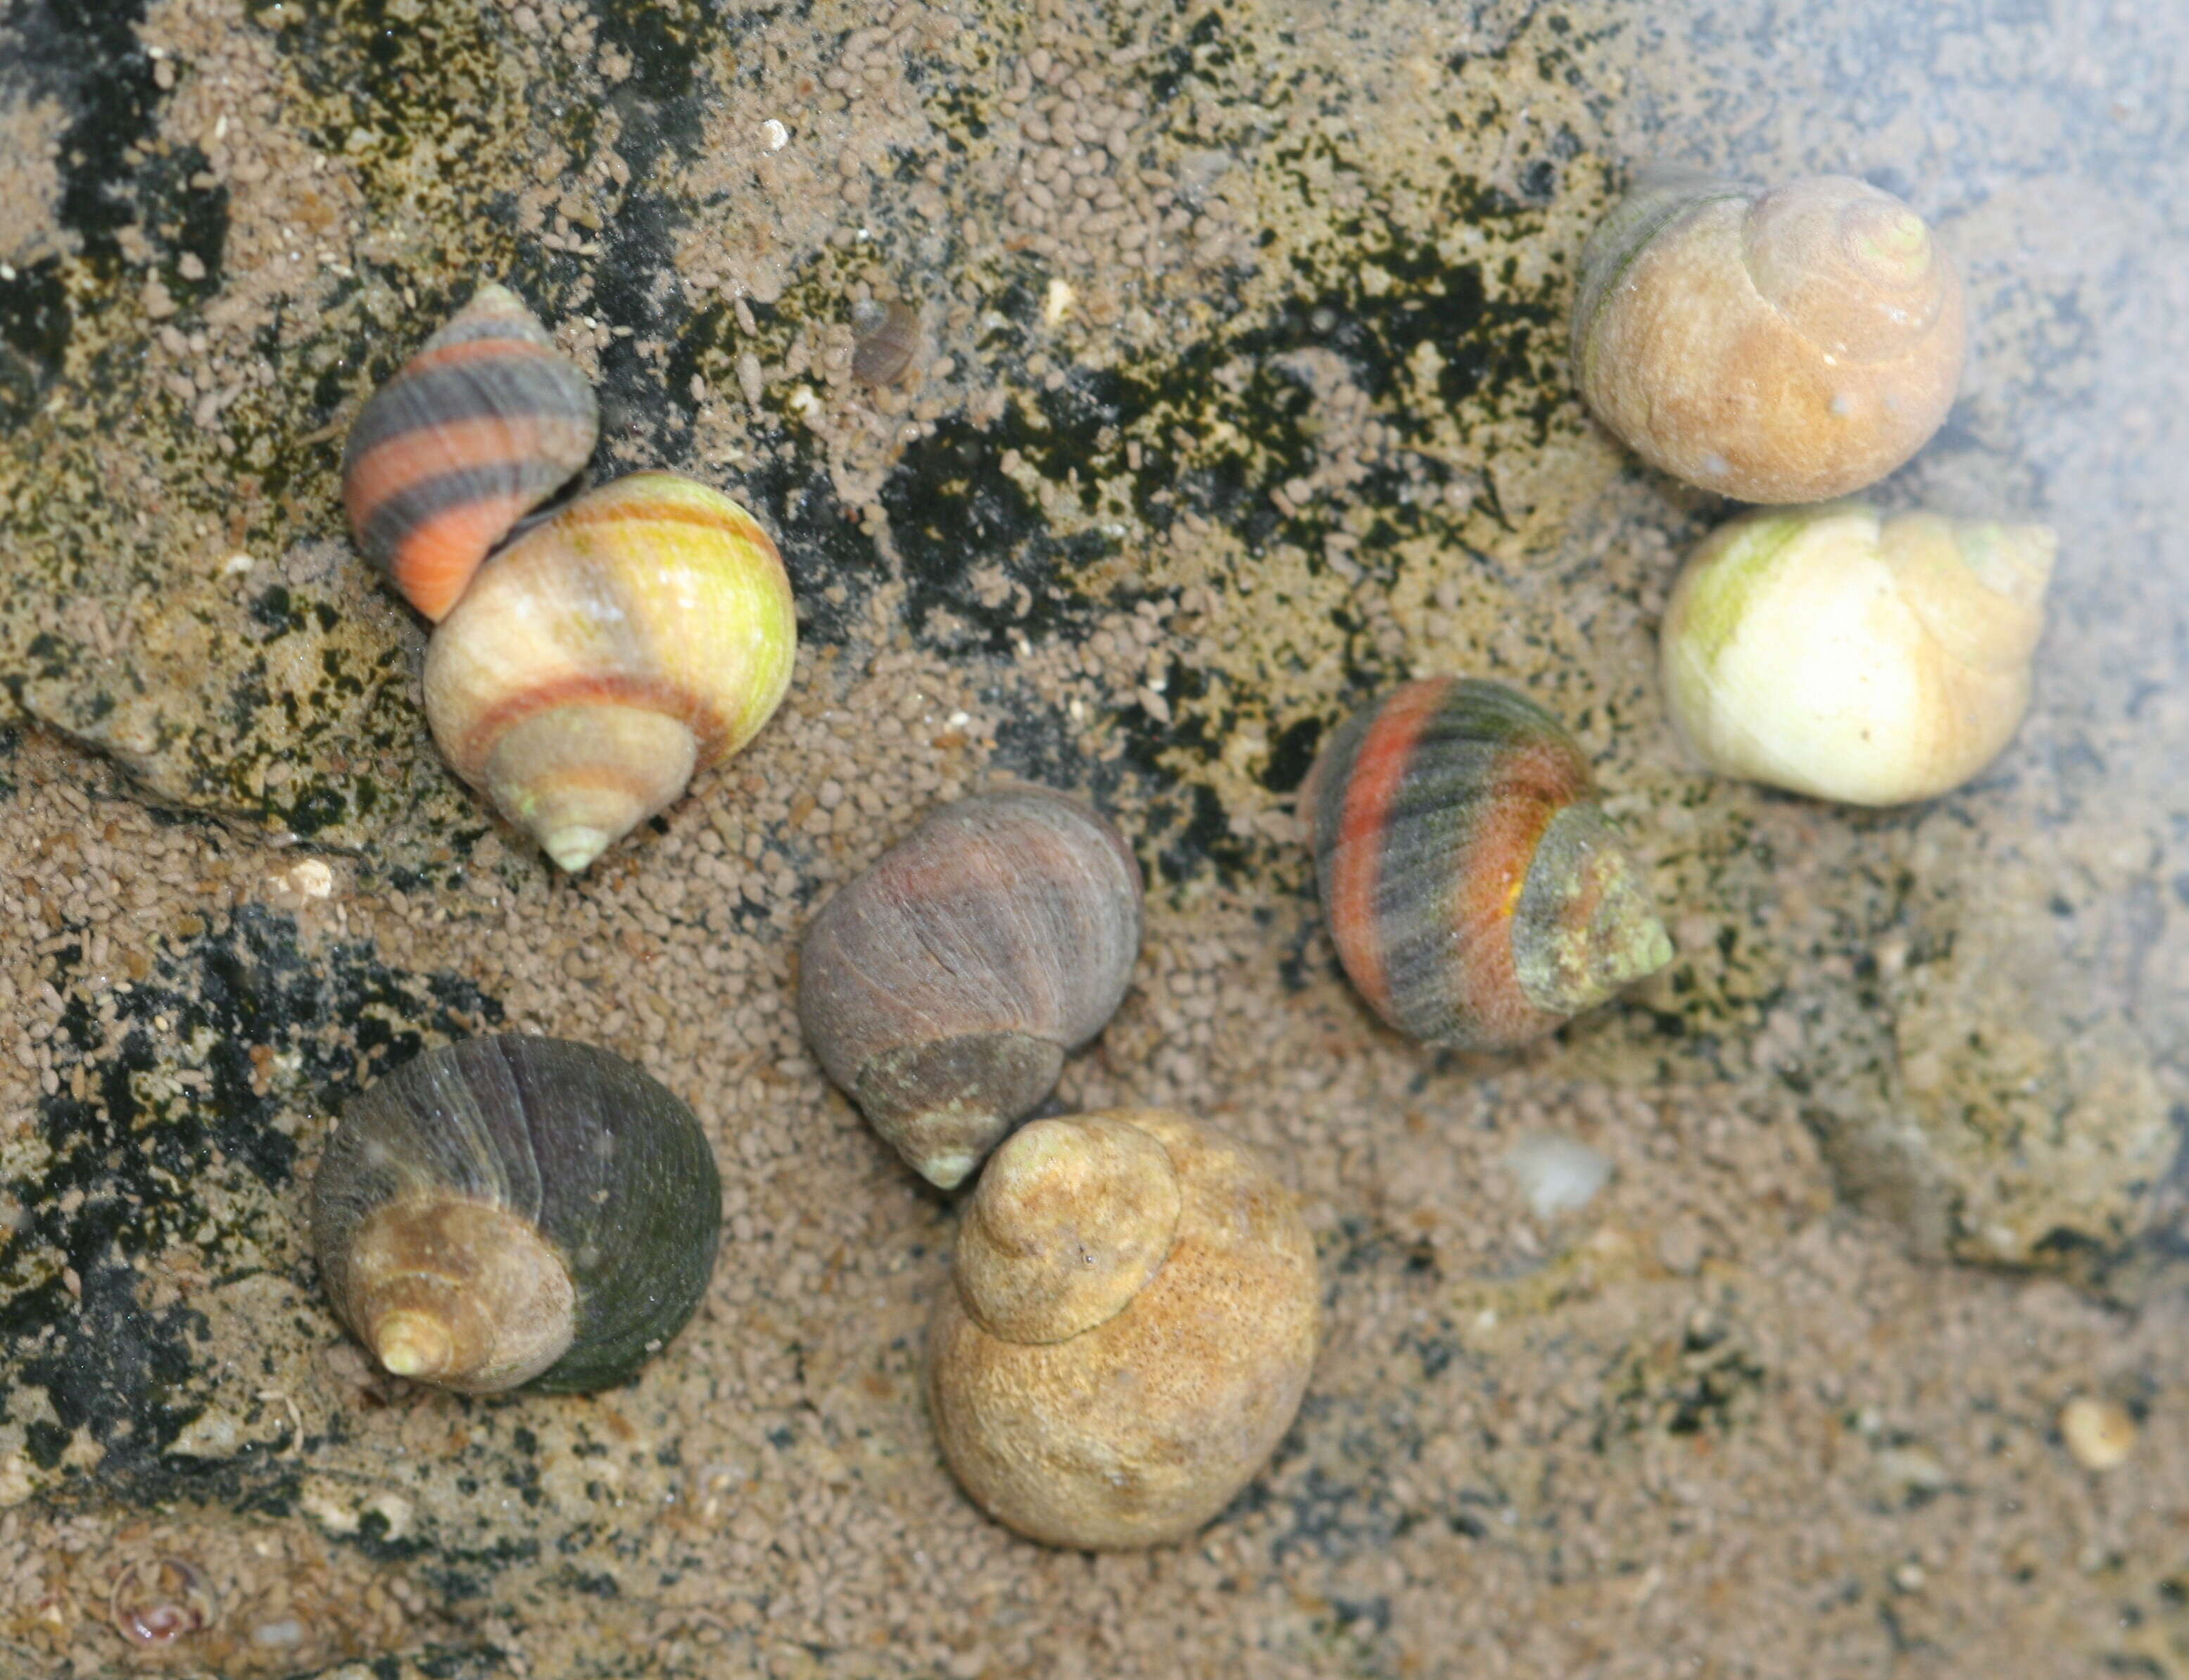 Image of Periwinkle snails